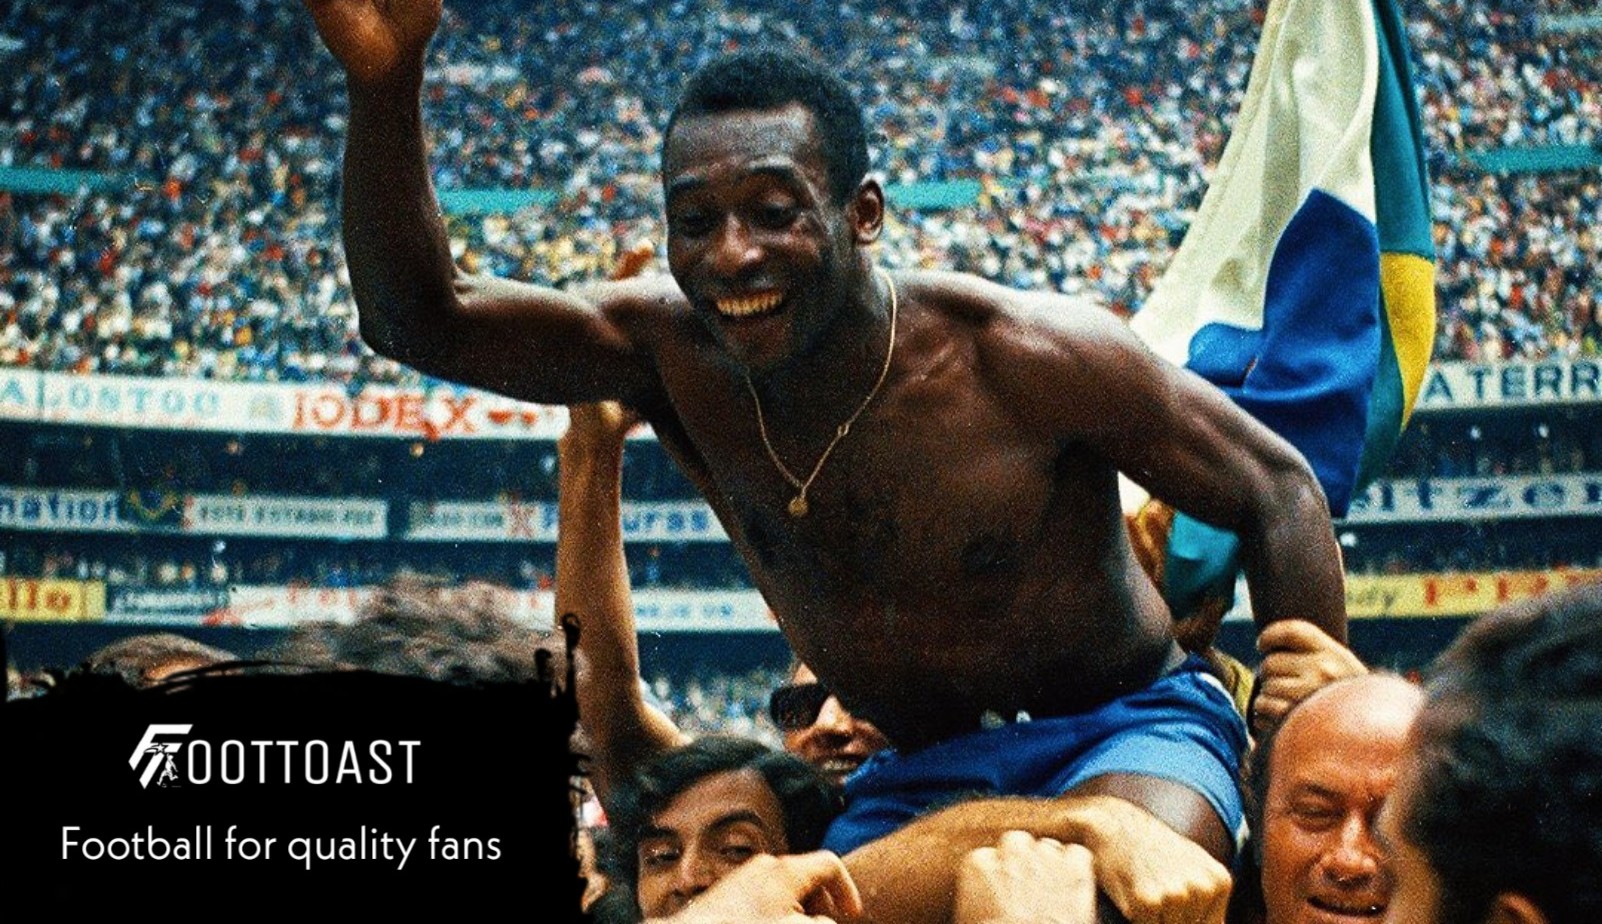 Football king Pele has died: Family confirms